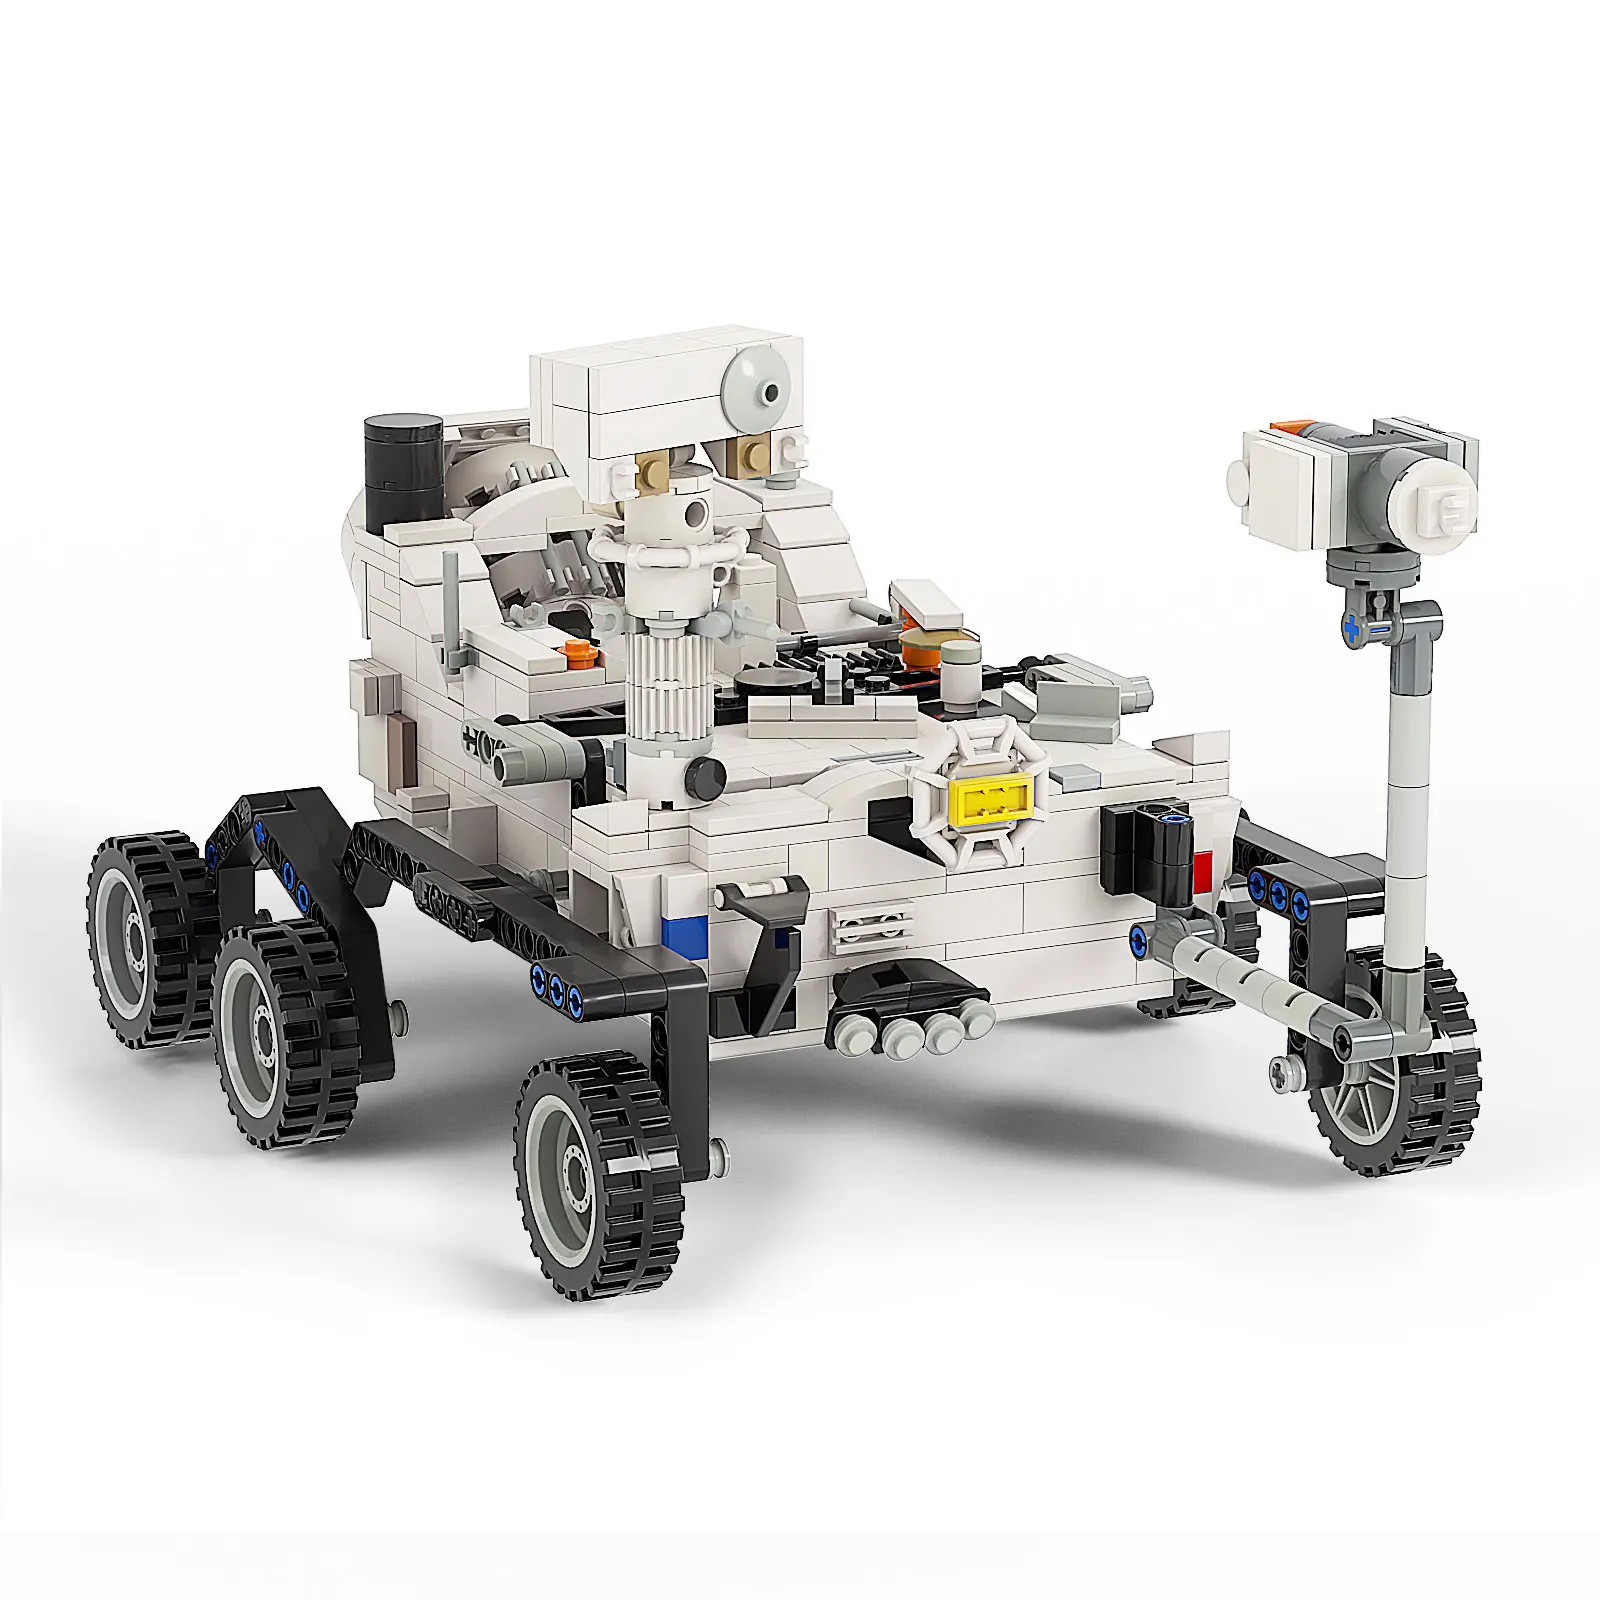 

MOC Space Explore Perseverance 2020 Mars Rover Building Blocks Kits High-Tech Bricks Set Brain Game Toy For Children Kids Gifts